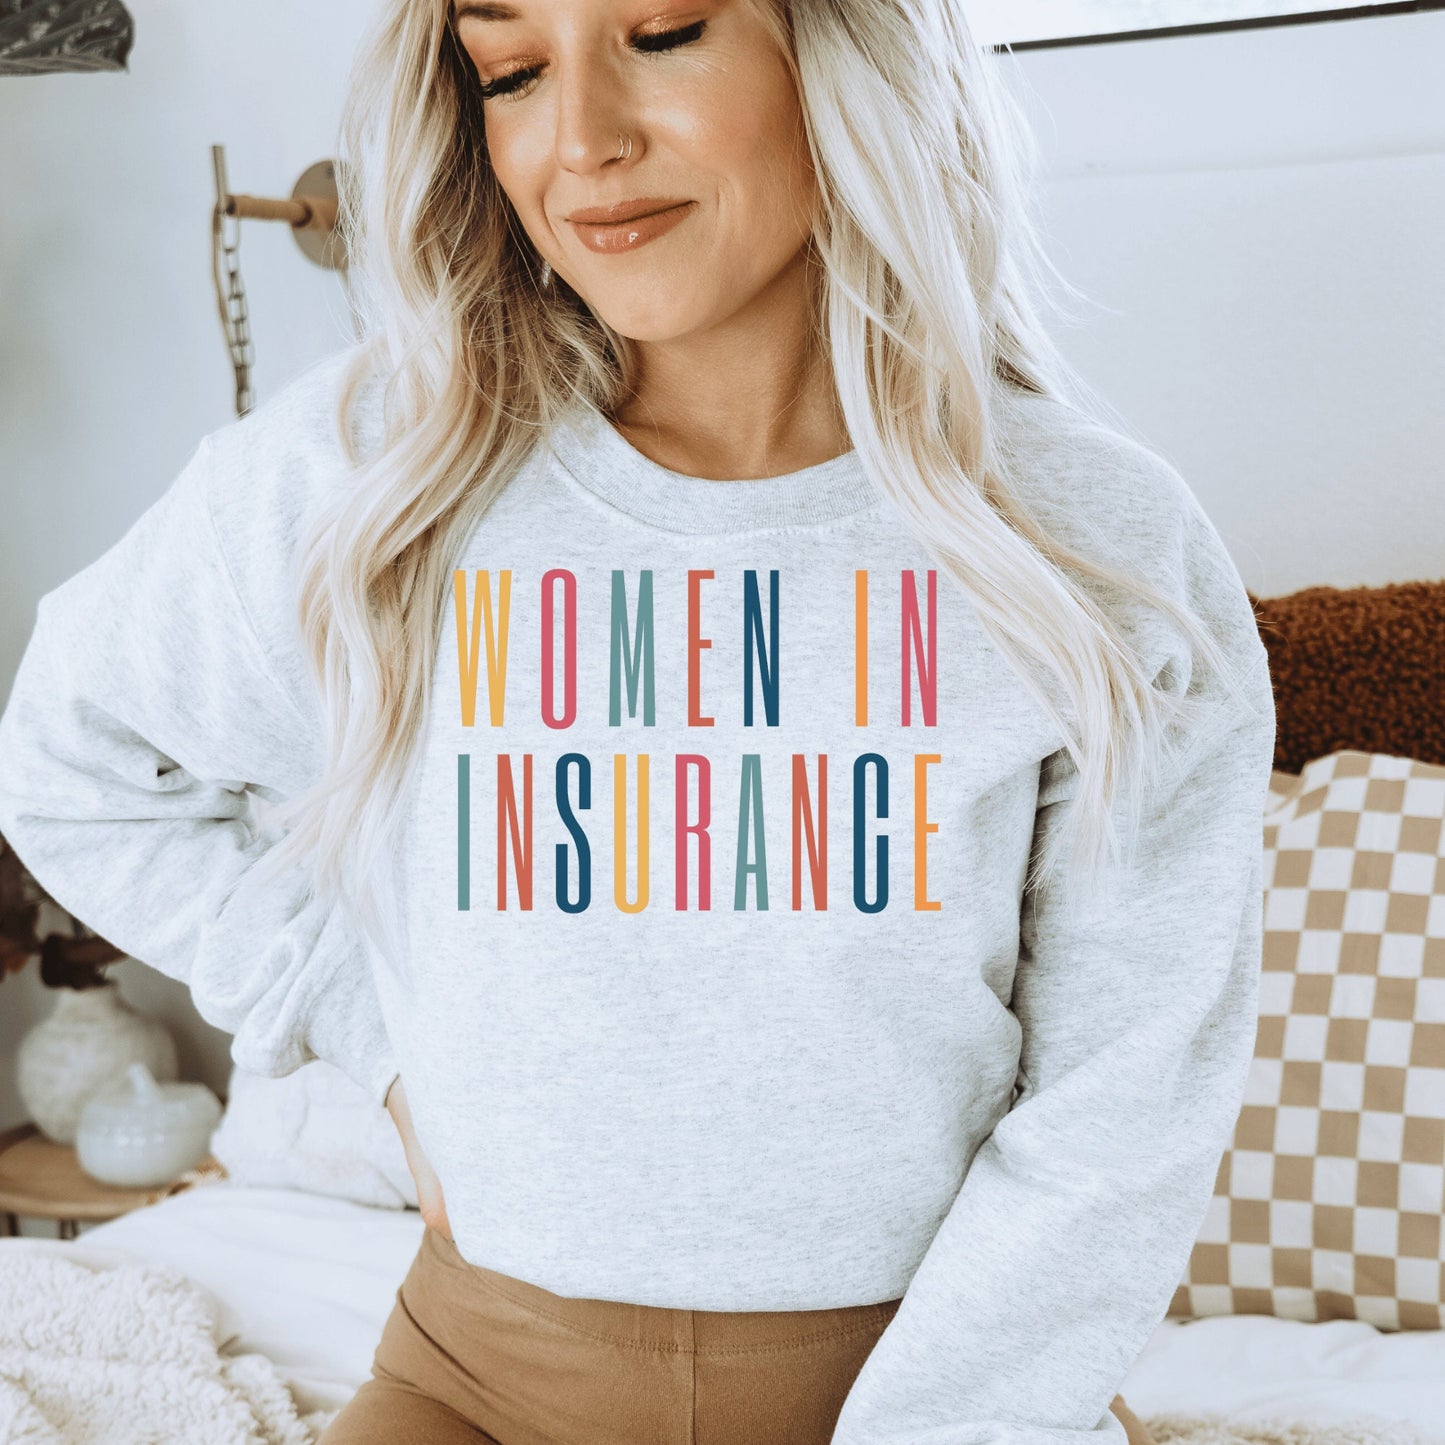 light gray unisex sweatshirt that says "women in insurance" in all capital, multicolored letters and makes the perfect gift for an insurance agent